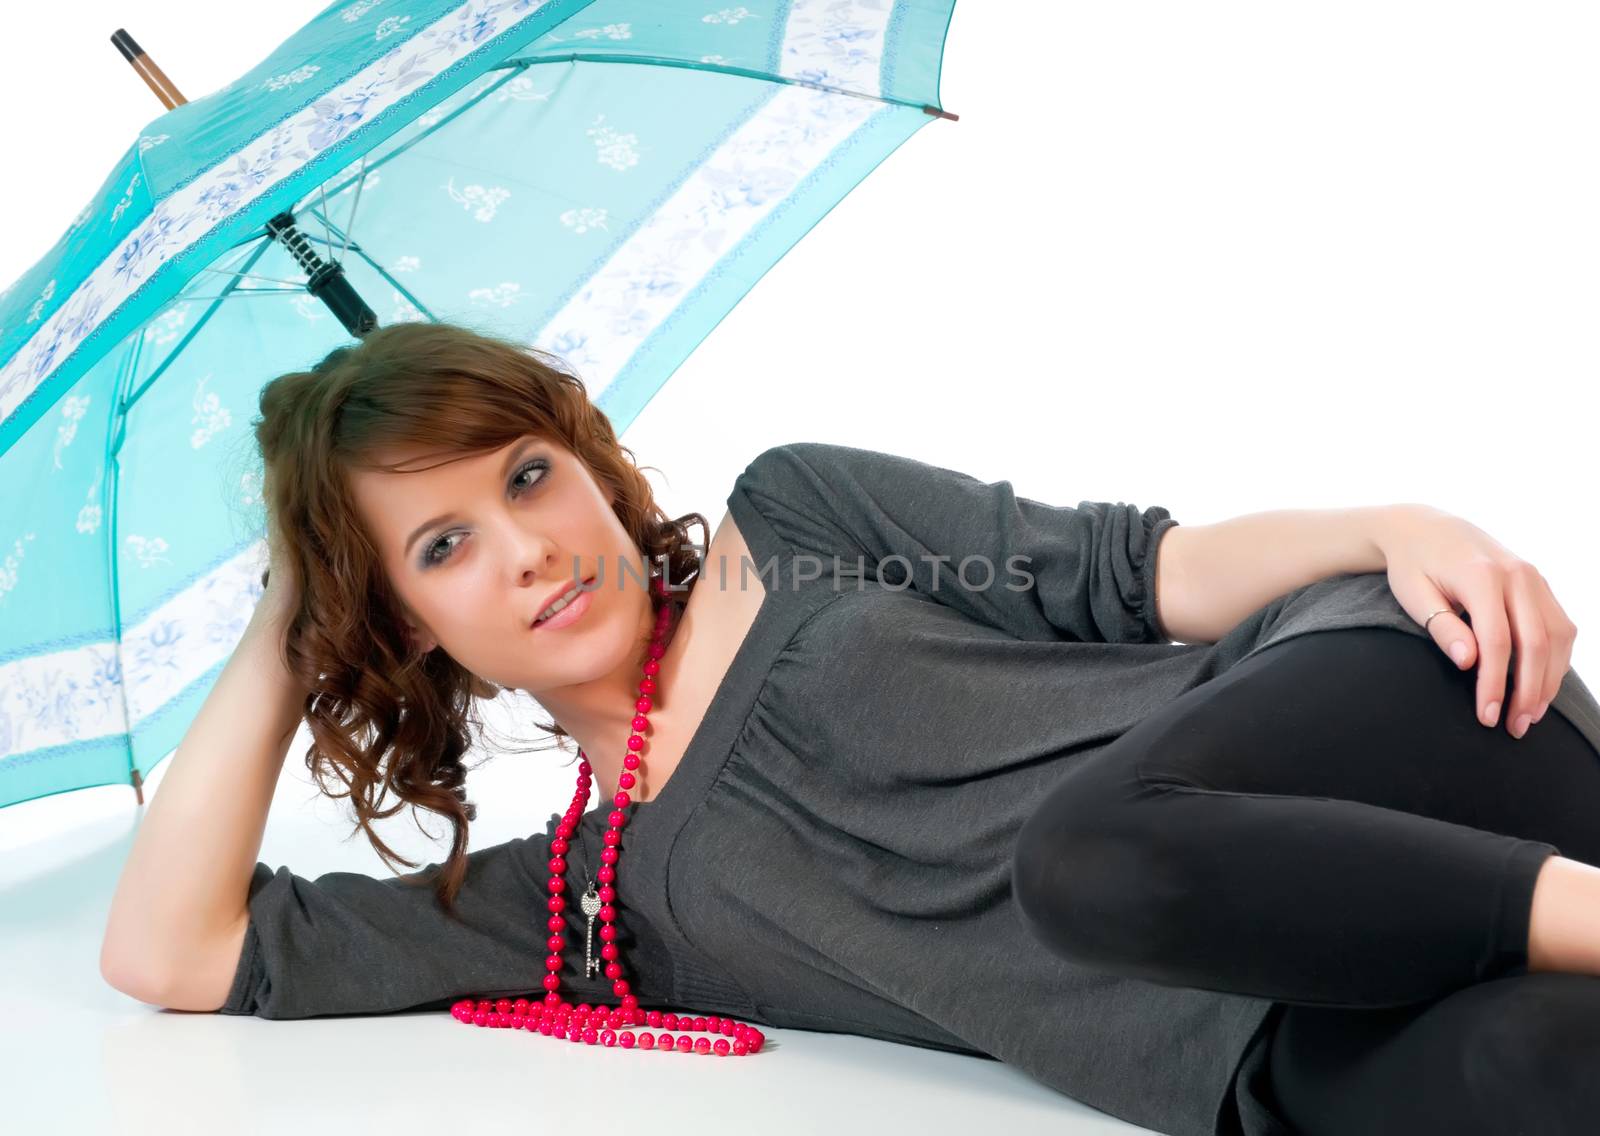 Beautiful young woman reclining under an umbrella against a white background and reflective floor.